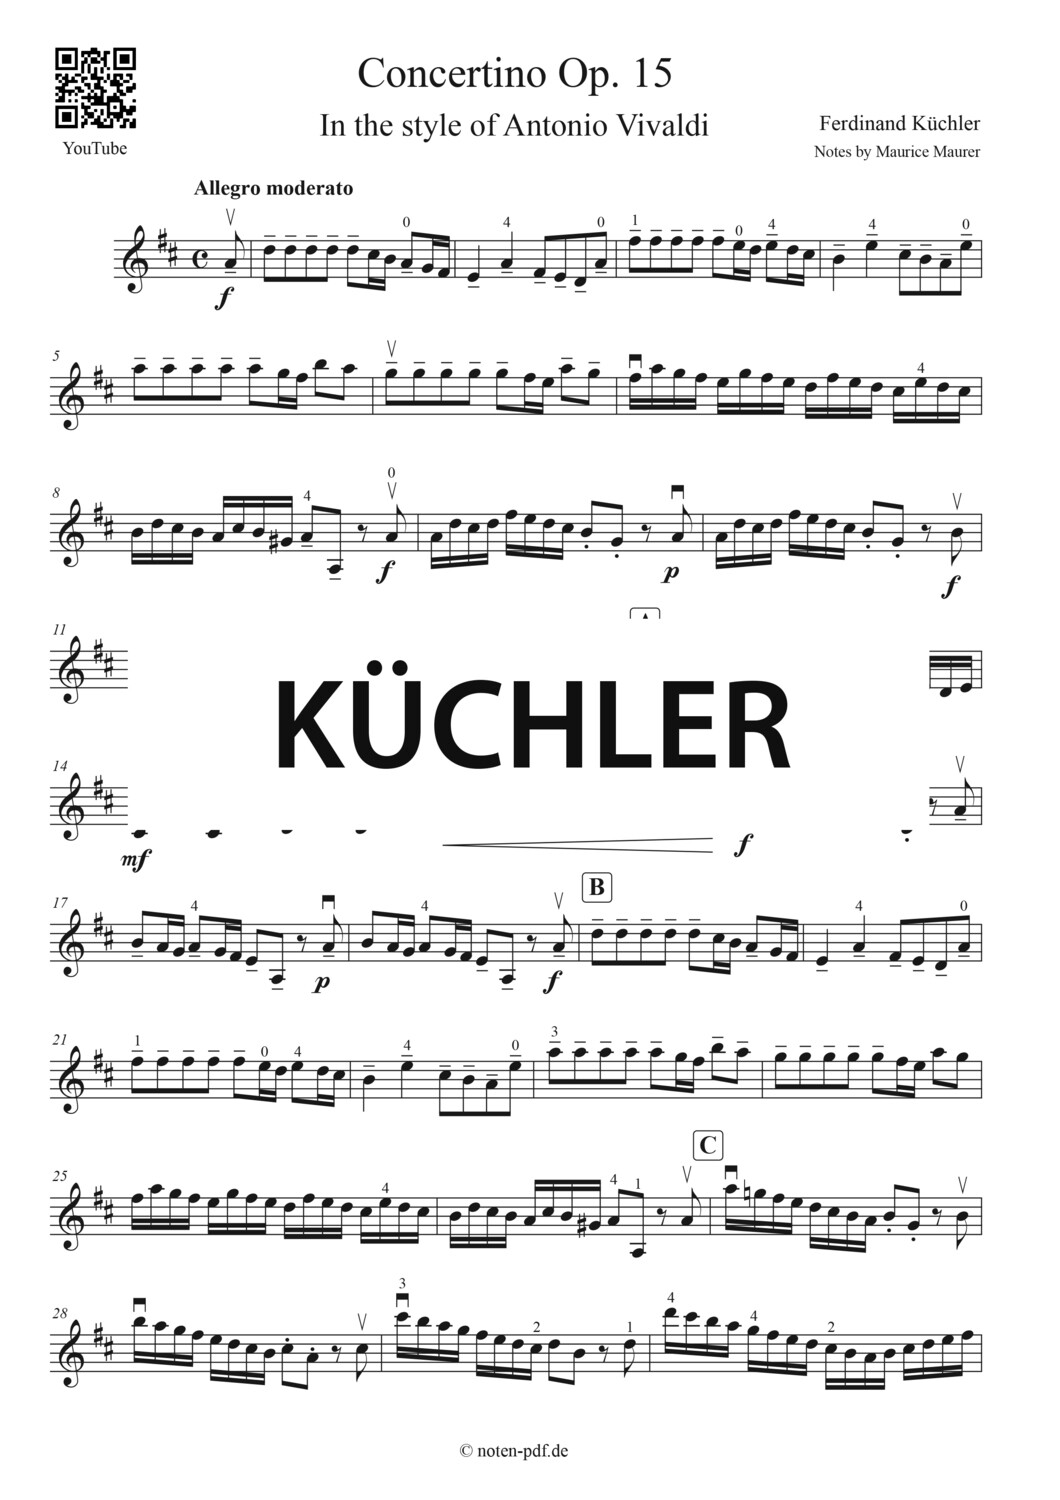 Küchler: Concertino Op. 15 - 1. Movement + MP3